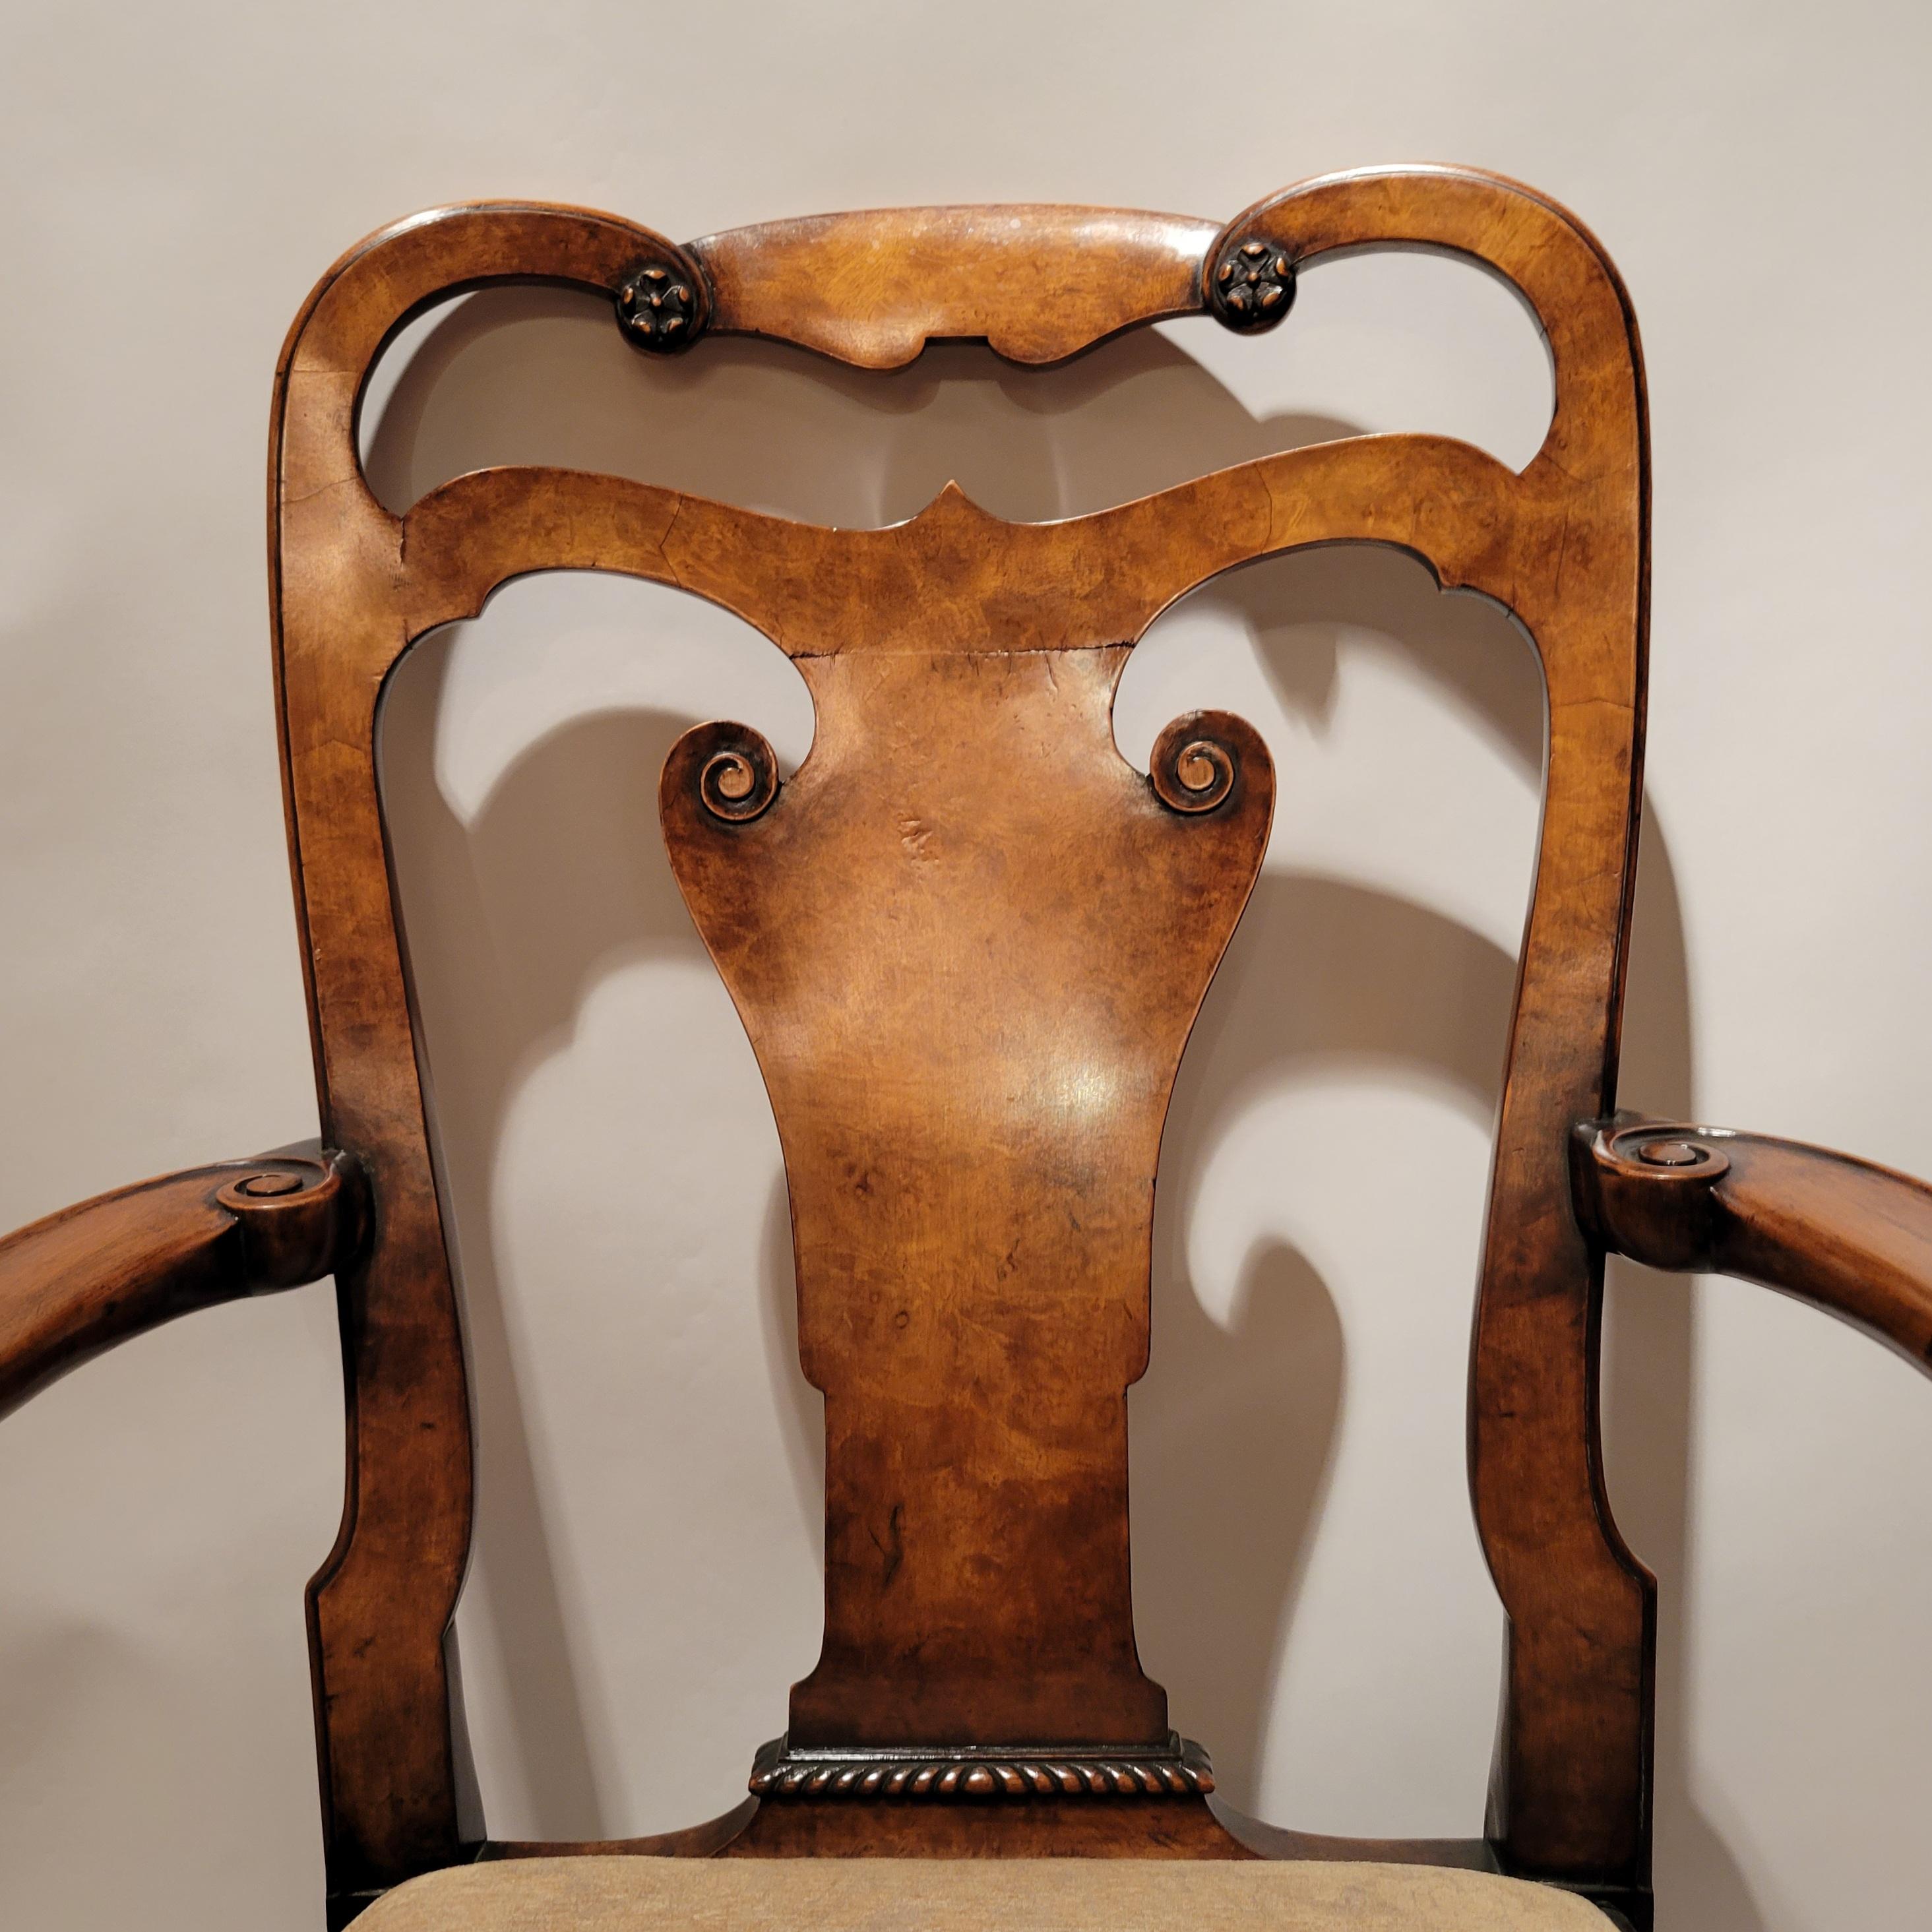 These handsome armchairs are beautifully made. The burl wood is exceptional.